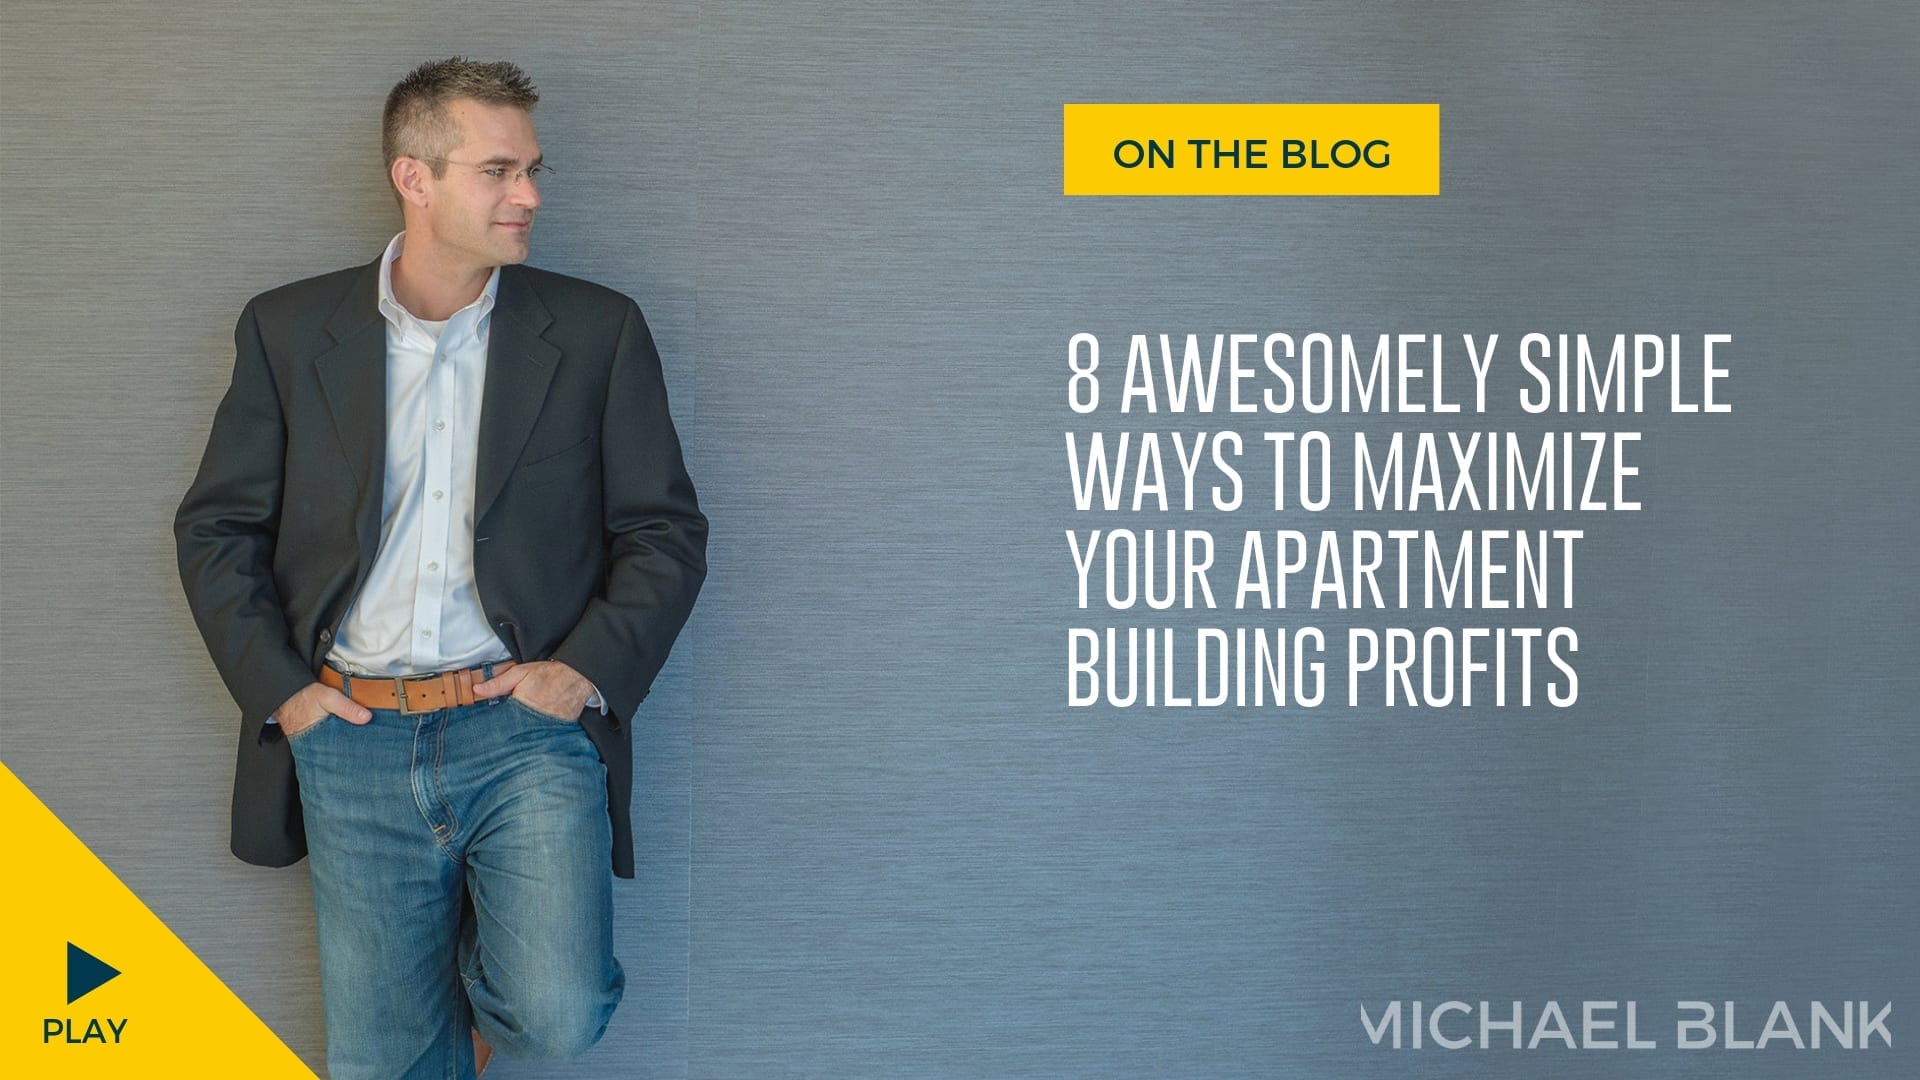 8 Awesomely Simple Ways to Maximize Your Apartment Building Profits